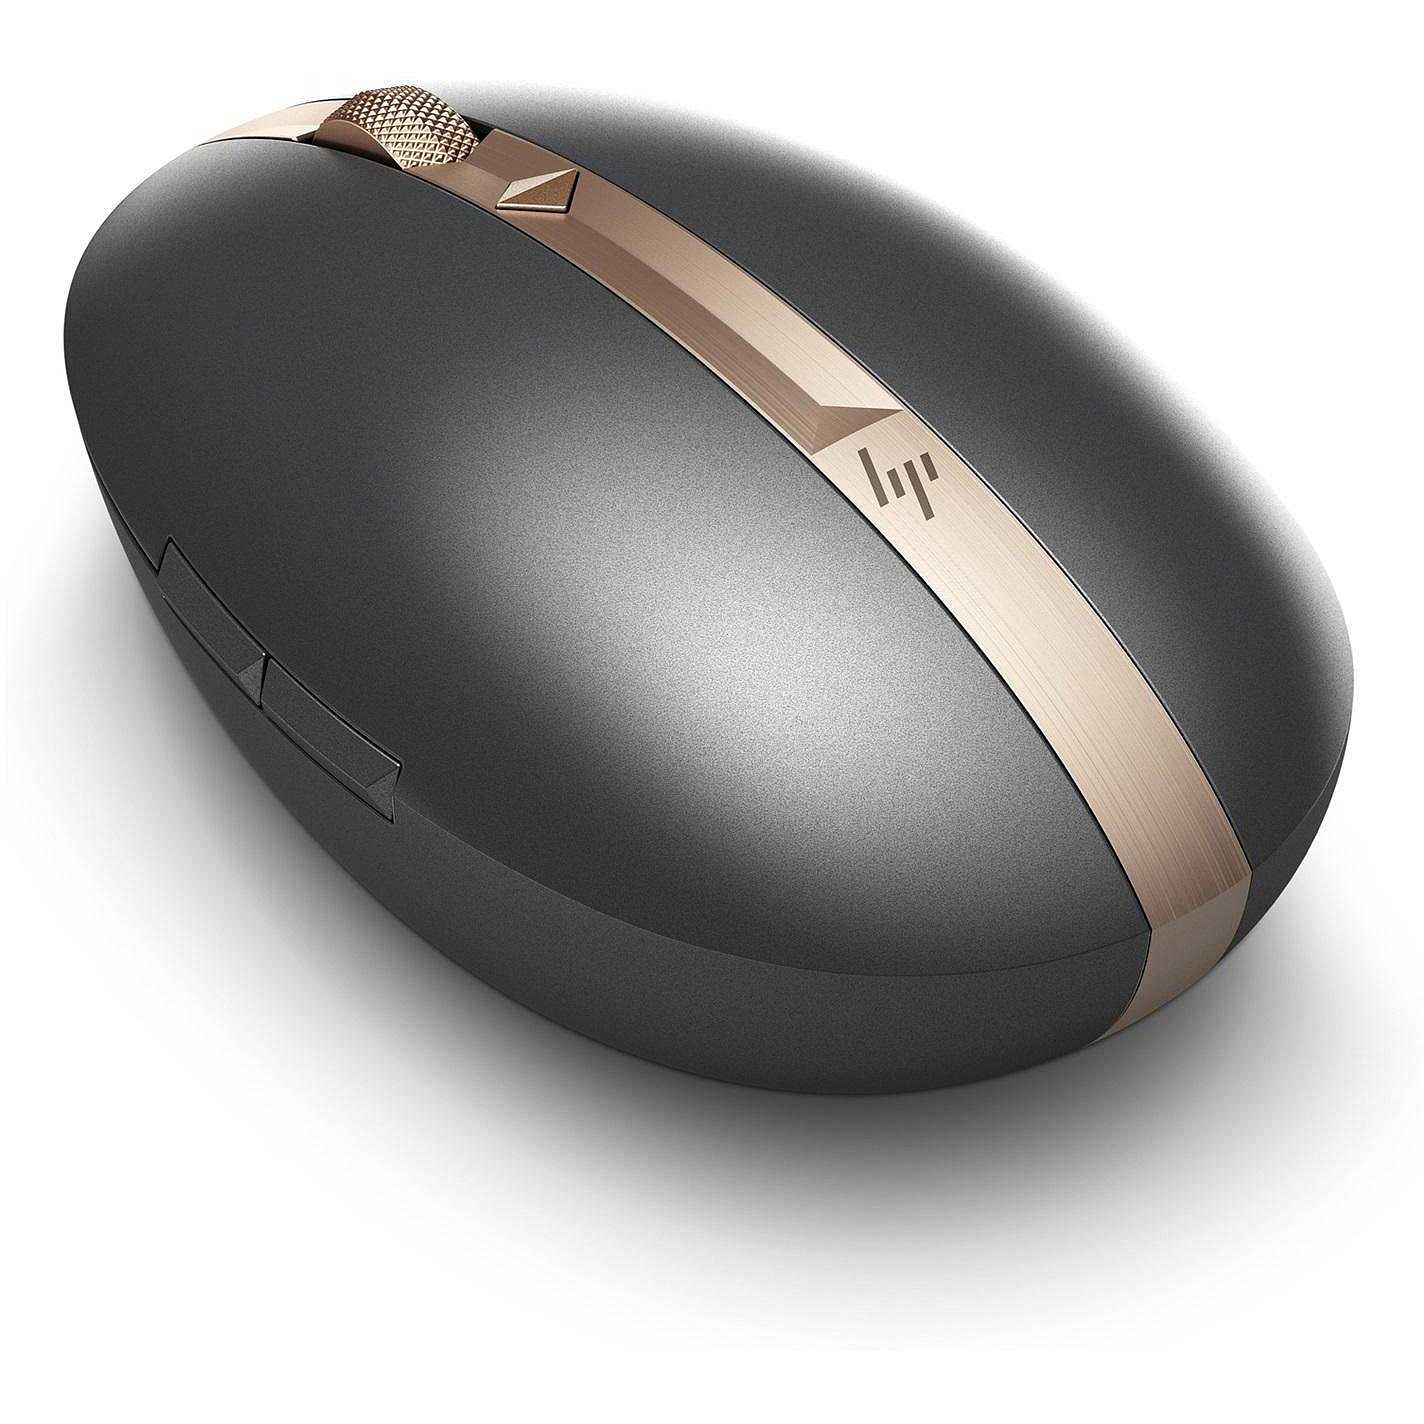 hp spectre mouse 700 not connecting